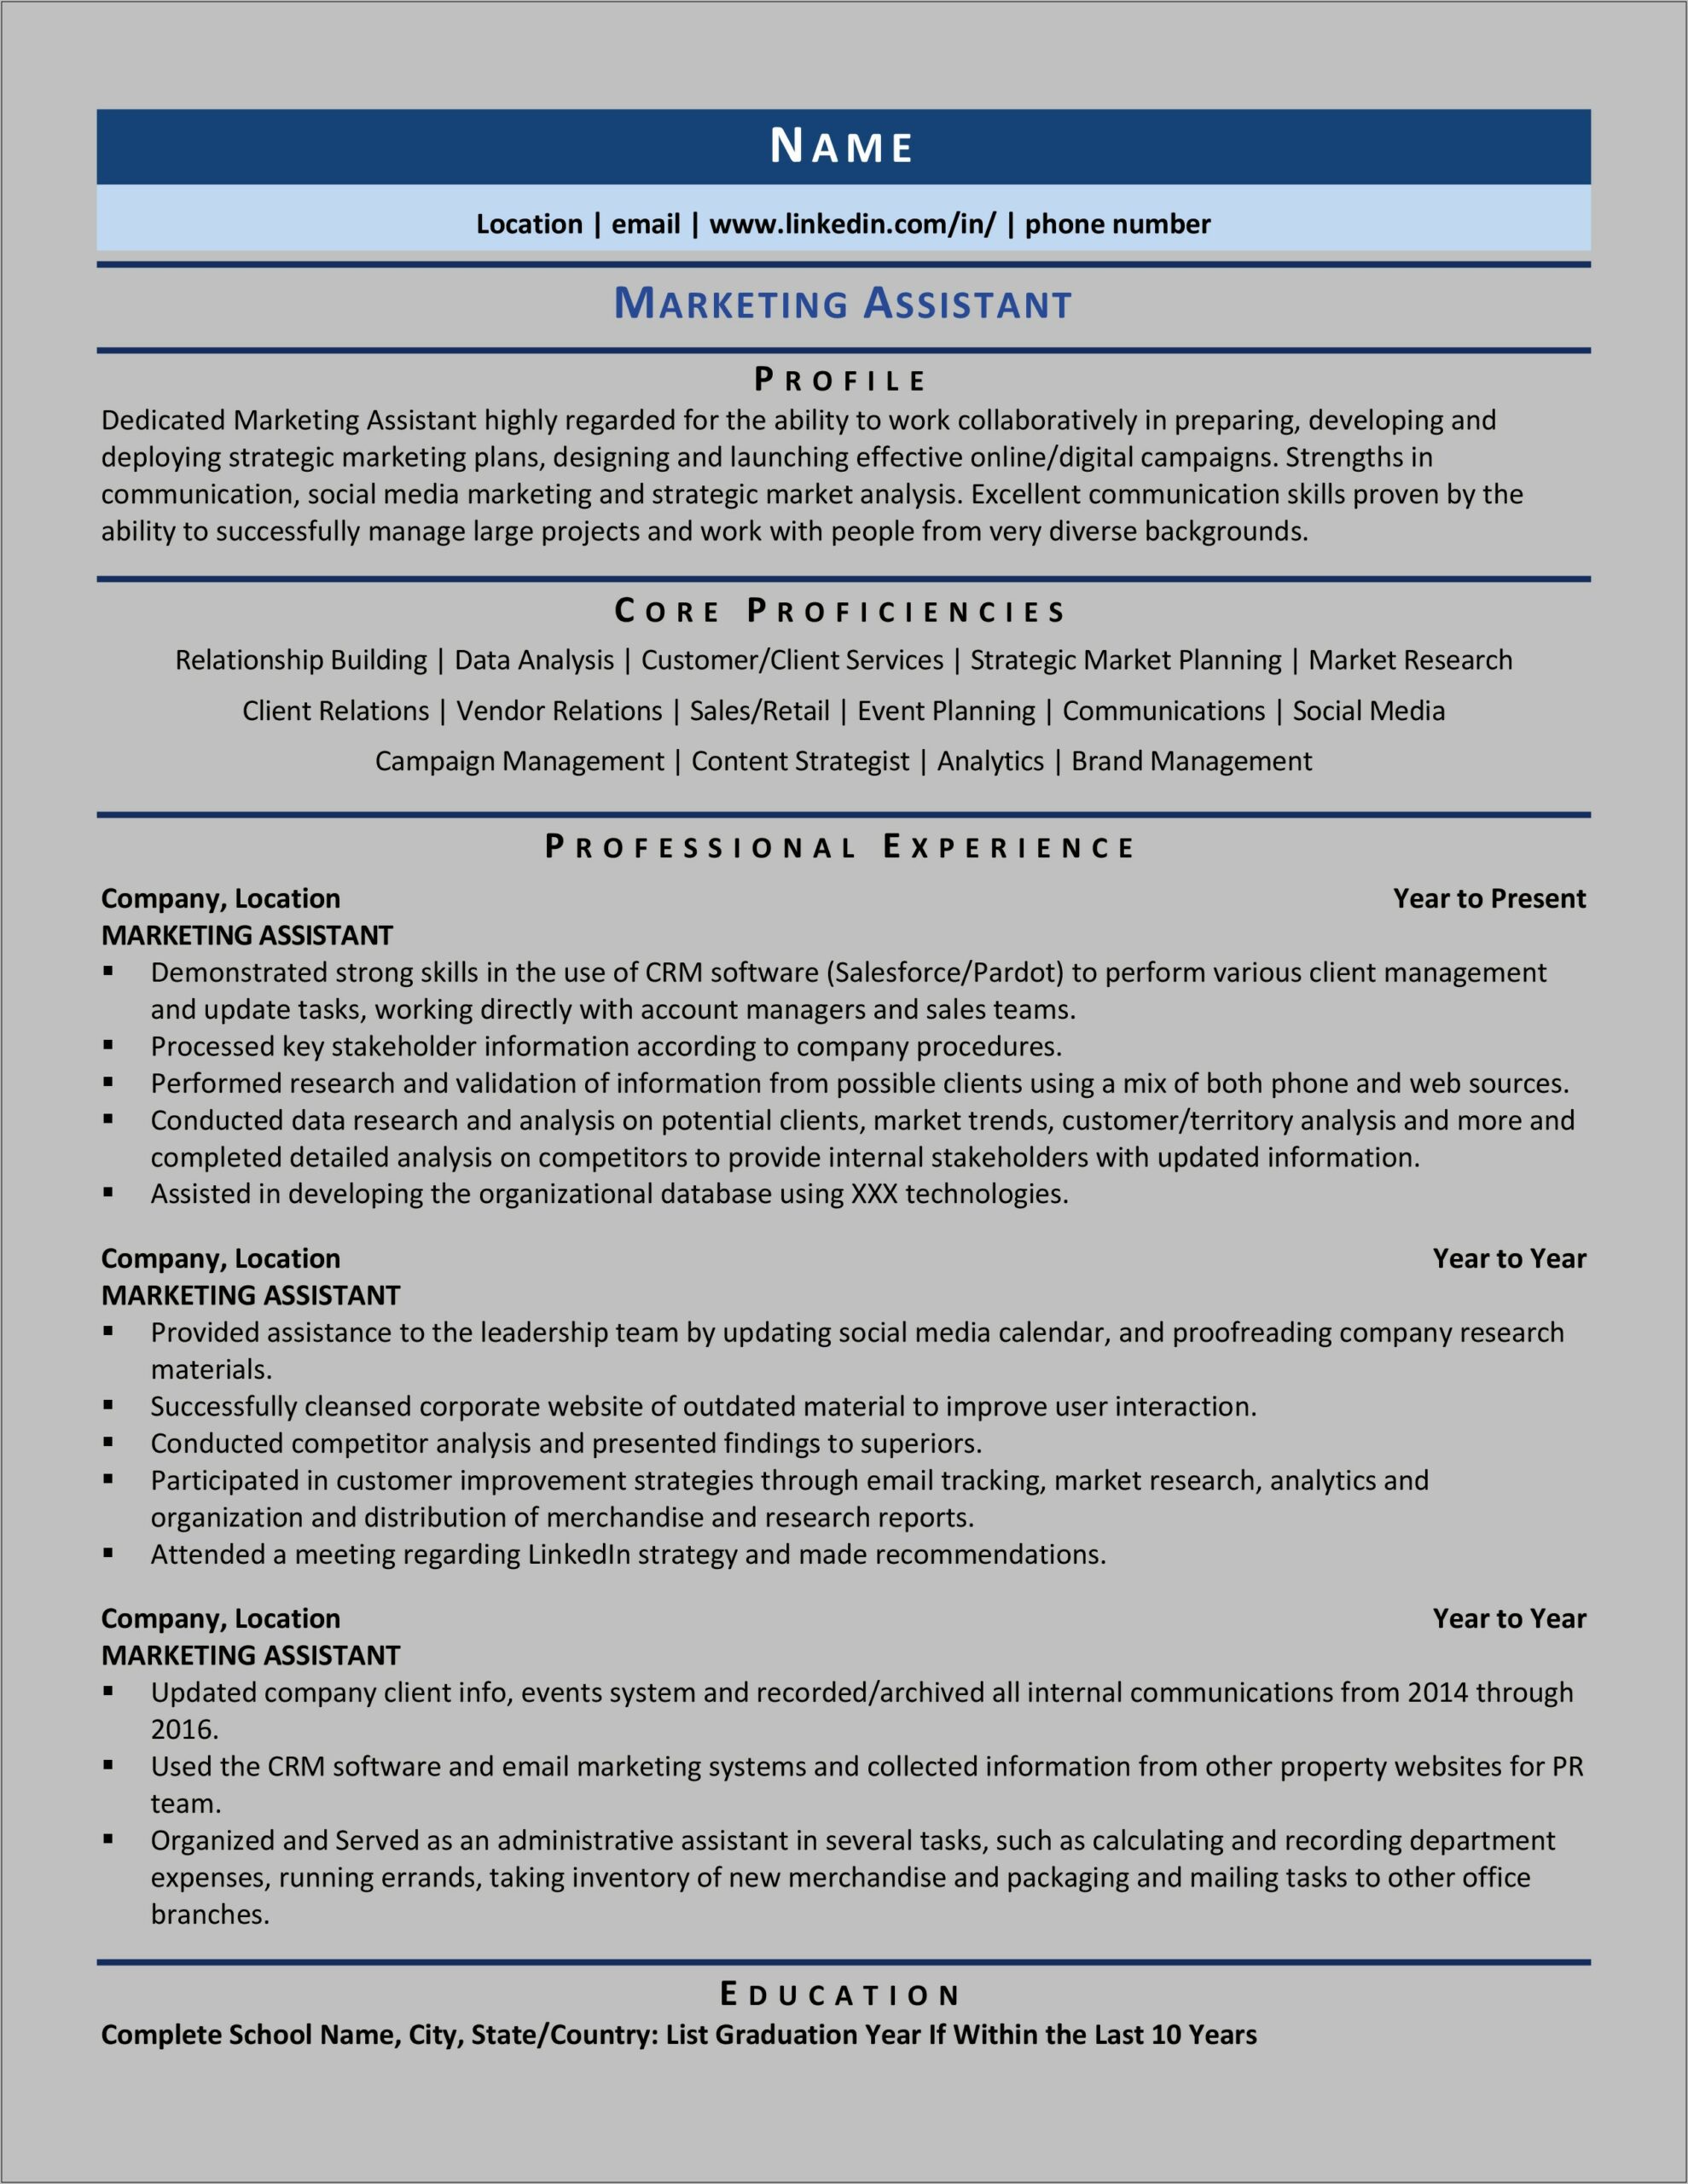 Resume Line For Working With Other People